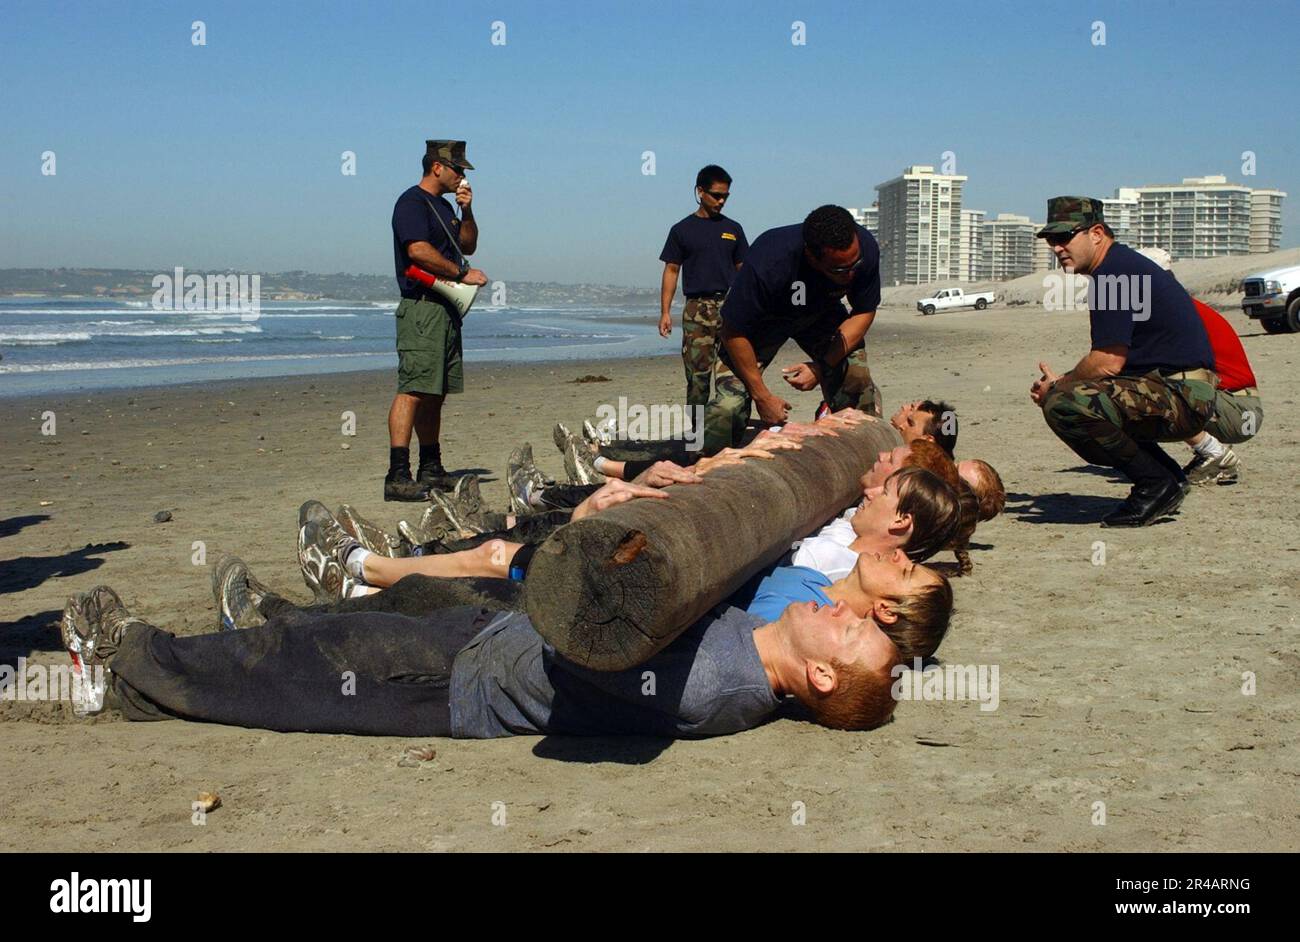 US Navy  U.S. Olympic Team triathletes perform physical fitness with a large log during a day of training with Navy SEALs (Sea, Air, Land) on board Naval Special Warfare Center, San Diego, Calif. Stock Photo